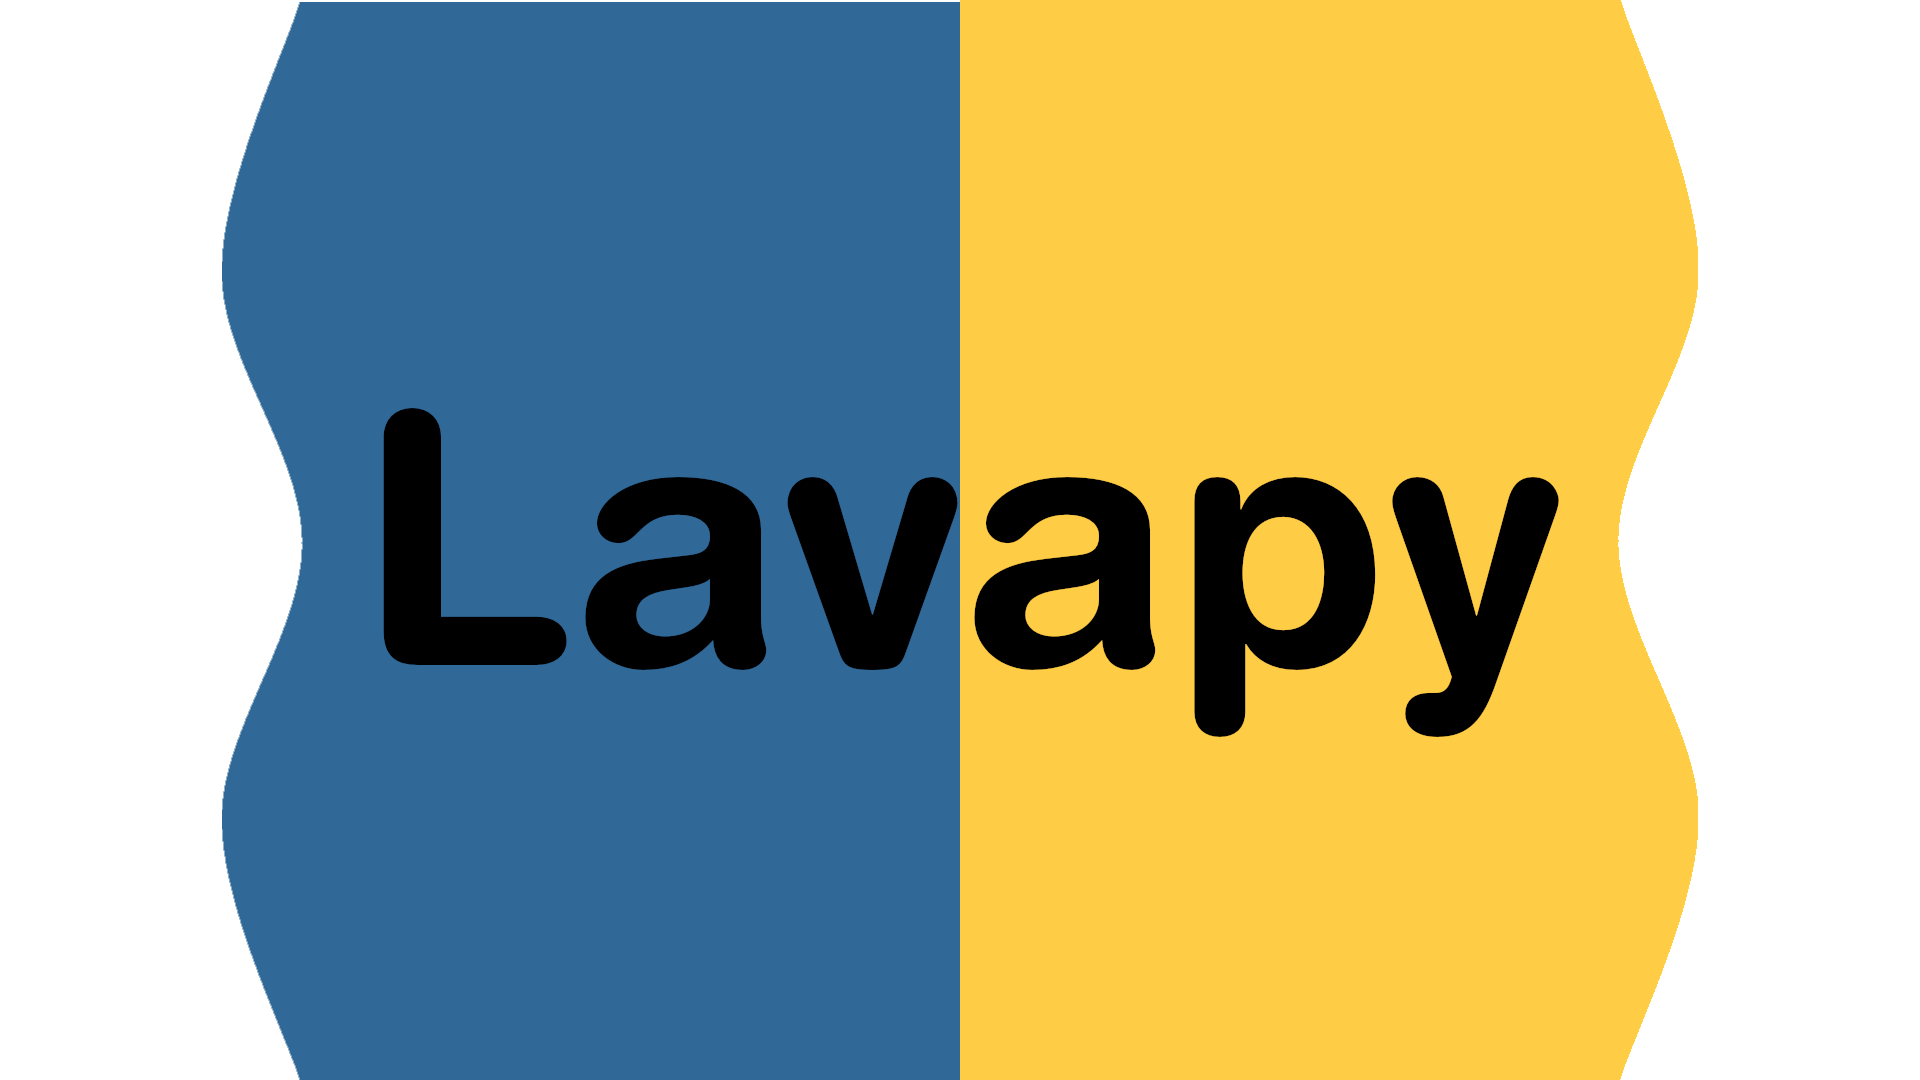 https://raw.githubusercontent.com/Aspect1103/Lavapy/master/logo.png